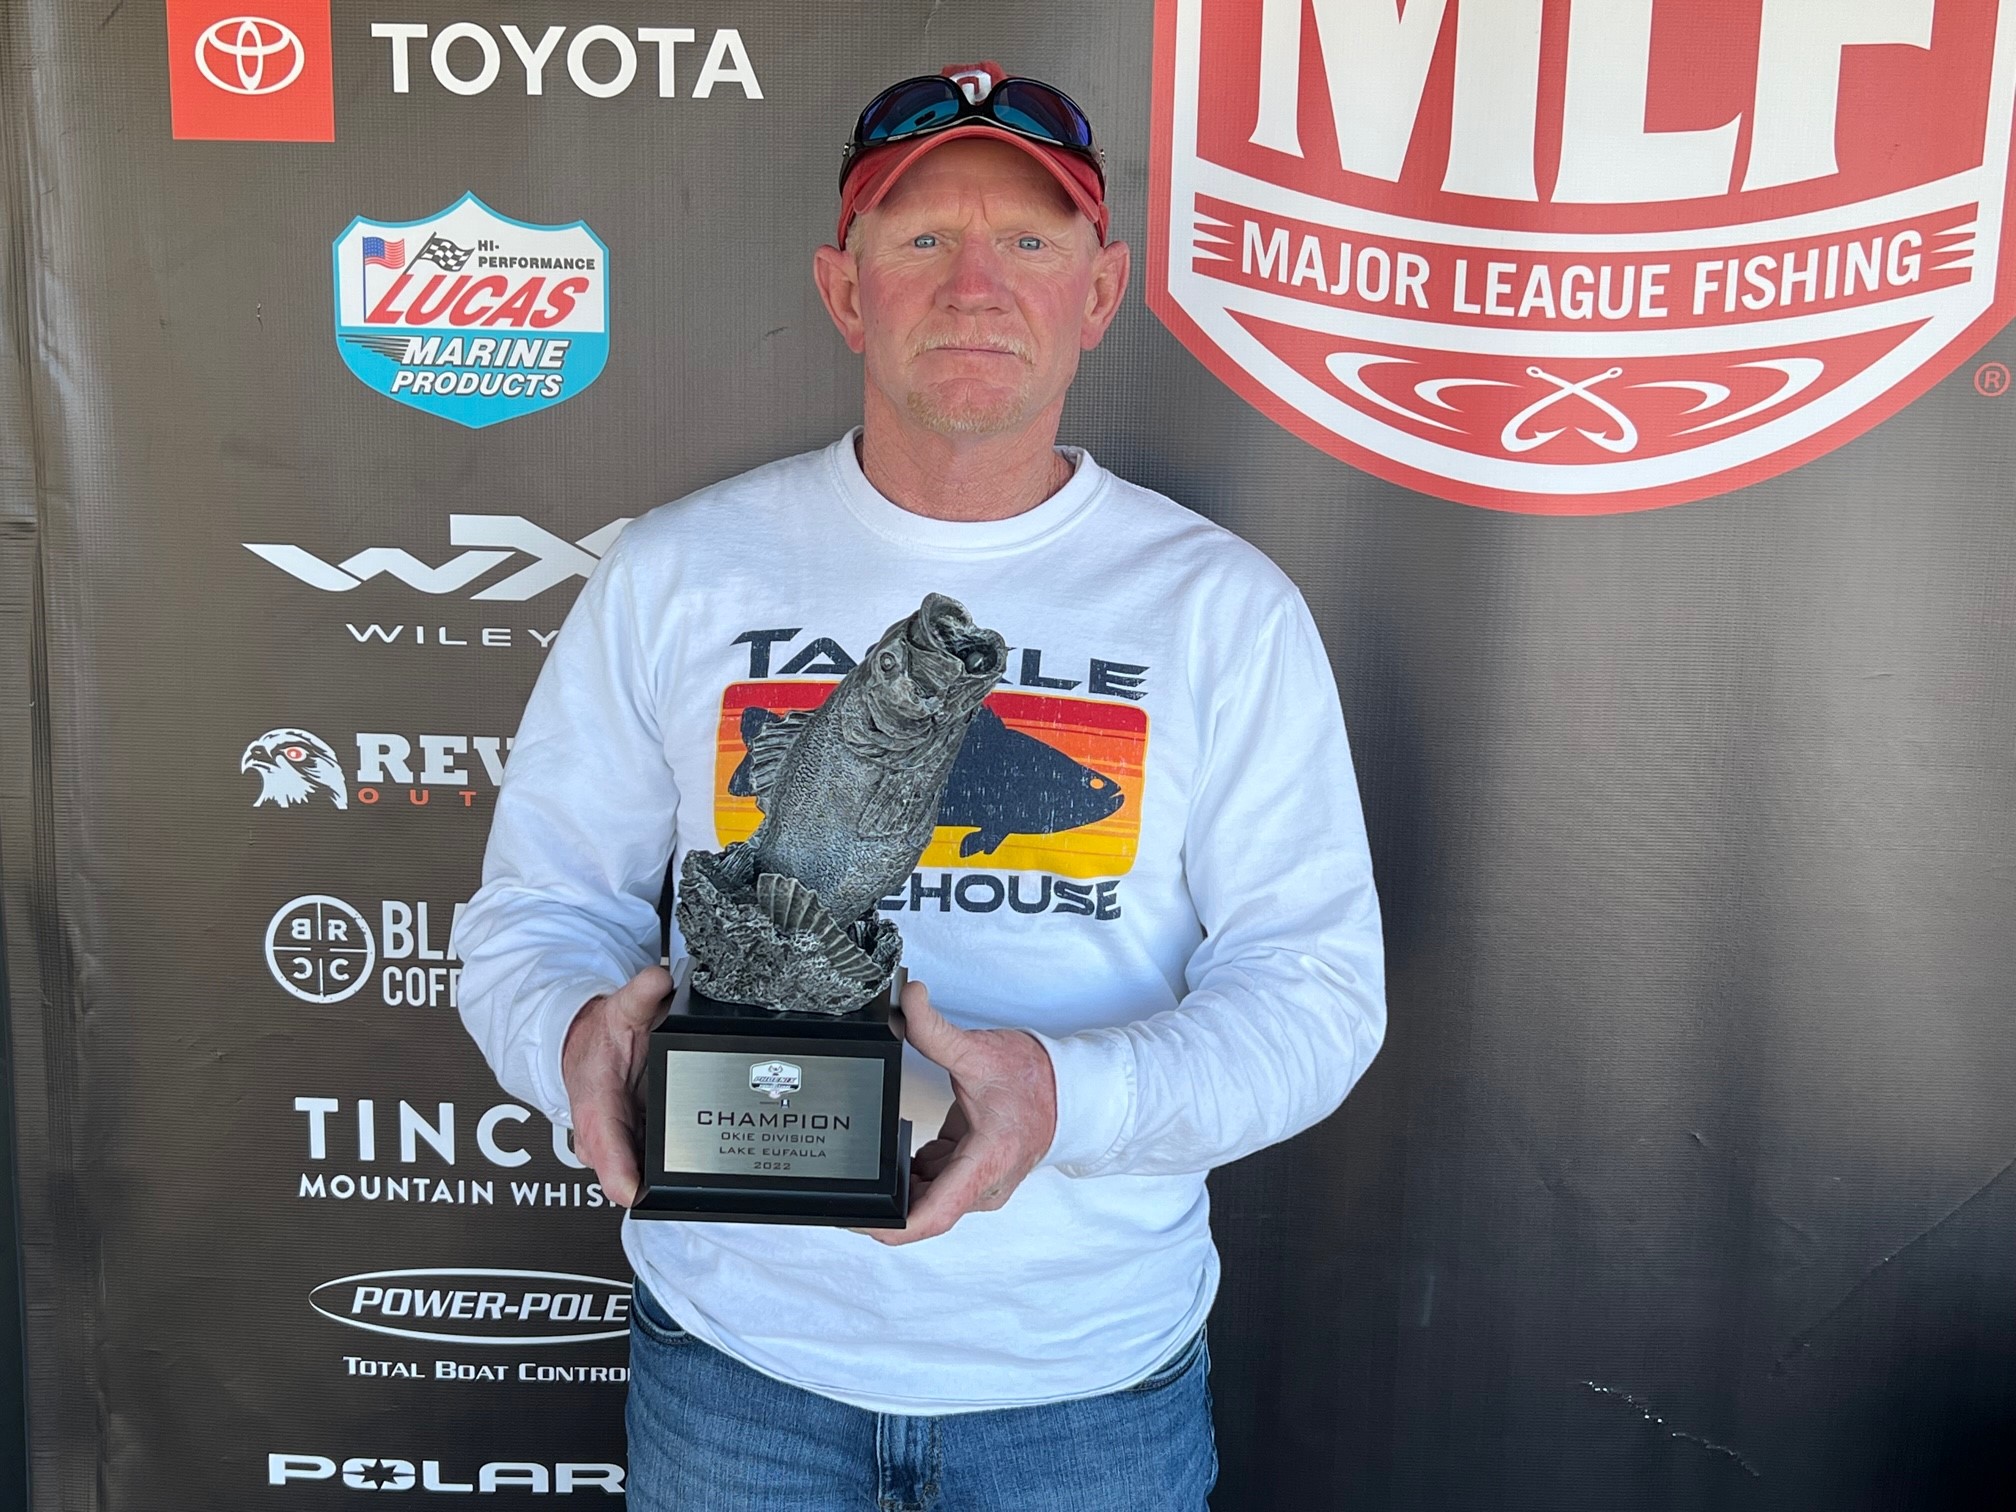 Marks crushes offshore to win Regional at Eufaula - Major League Fishing